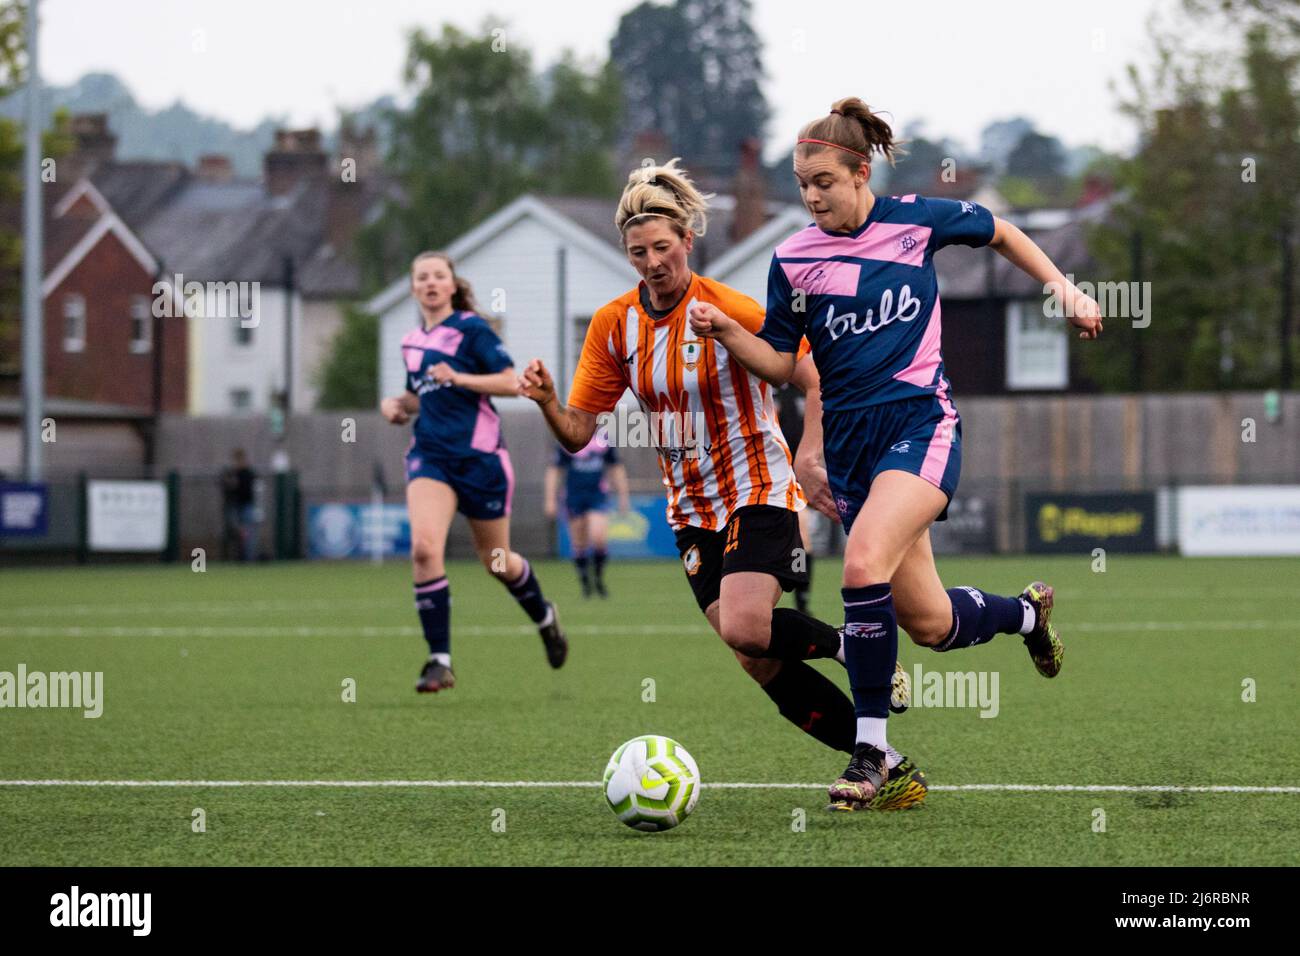 London, England. 03/05/2022, Jade Johnson (11 Ashford) and Asia Harbour Brown (18 Dulwich Hamlet) in action during the Capital Womens Senior Cup game between Ashford (Middlesex) and Dulwich Hamlet at Meadowbank in London, England.  Liam Asman/SPP Stock Photo